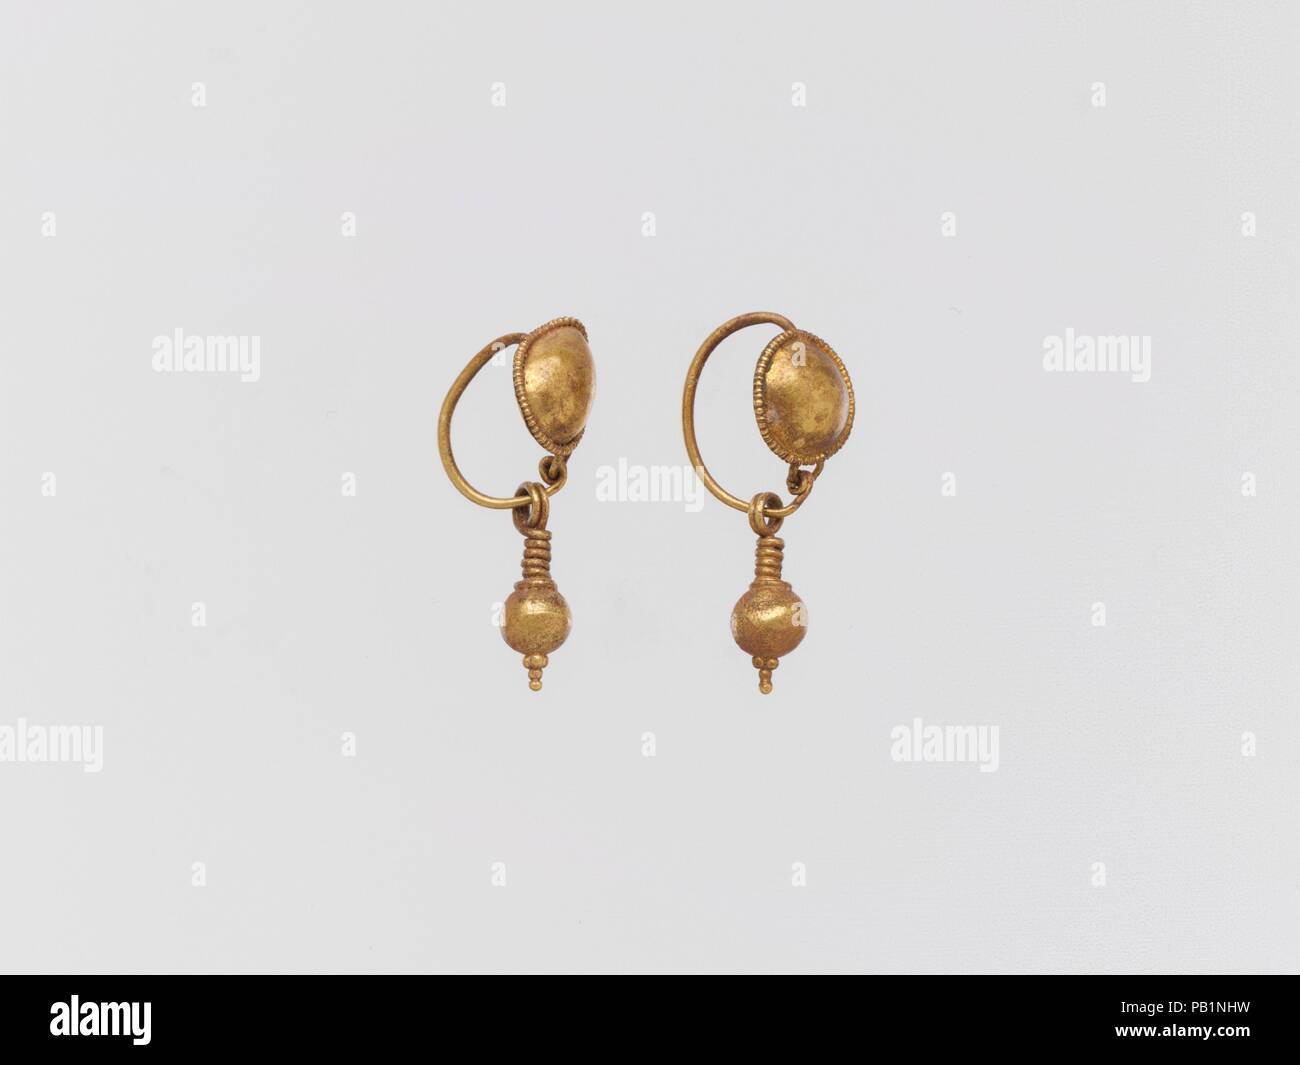 Earring with pendant. Dimensions: Other: 5/16 x 3/8 x 7/8 in. (0.8 x 1 x 2.3 cm). Museum: Metropolitan Museum of Art, New York, USA. Stock Photo